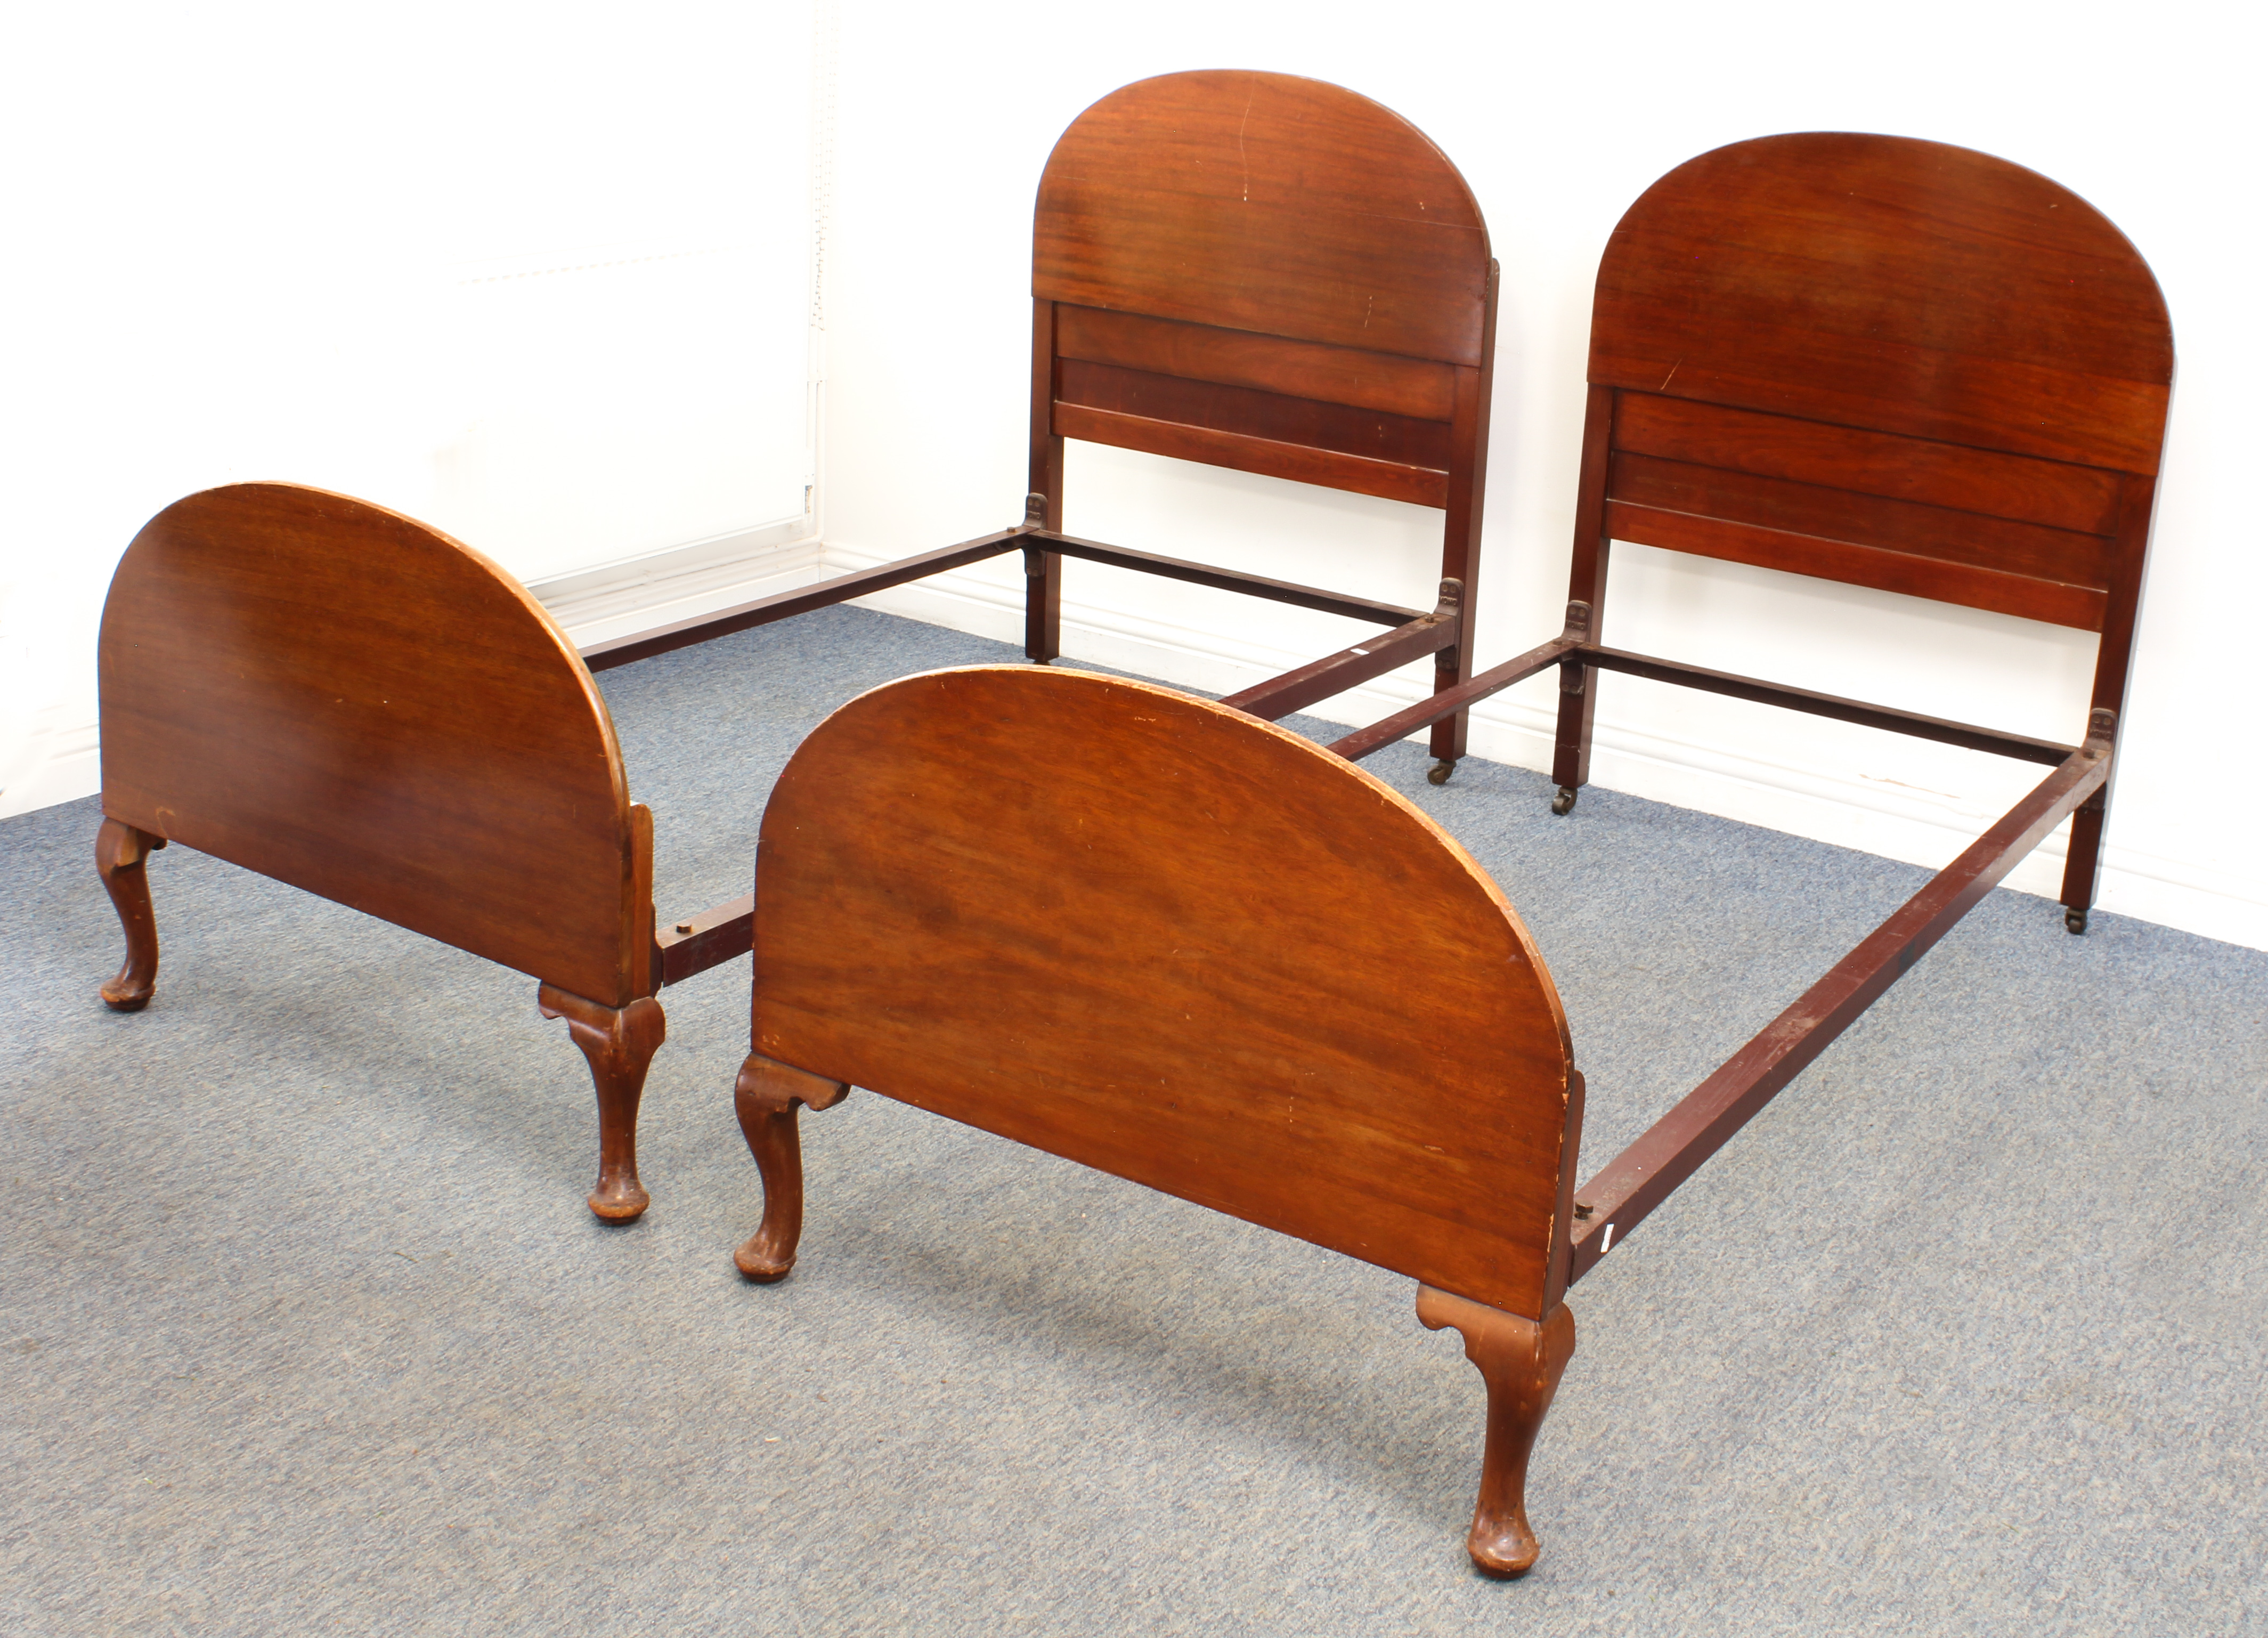 A pair of mid-century mahogany single beds - with arched head and foot boards, the footboards on